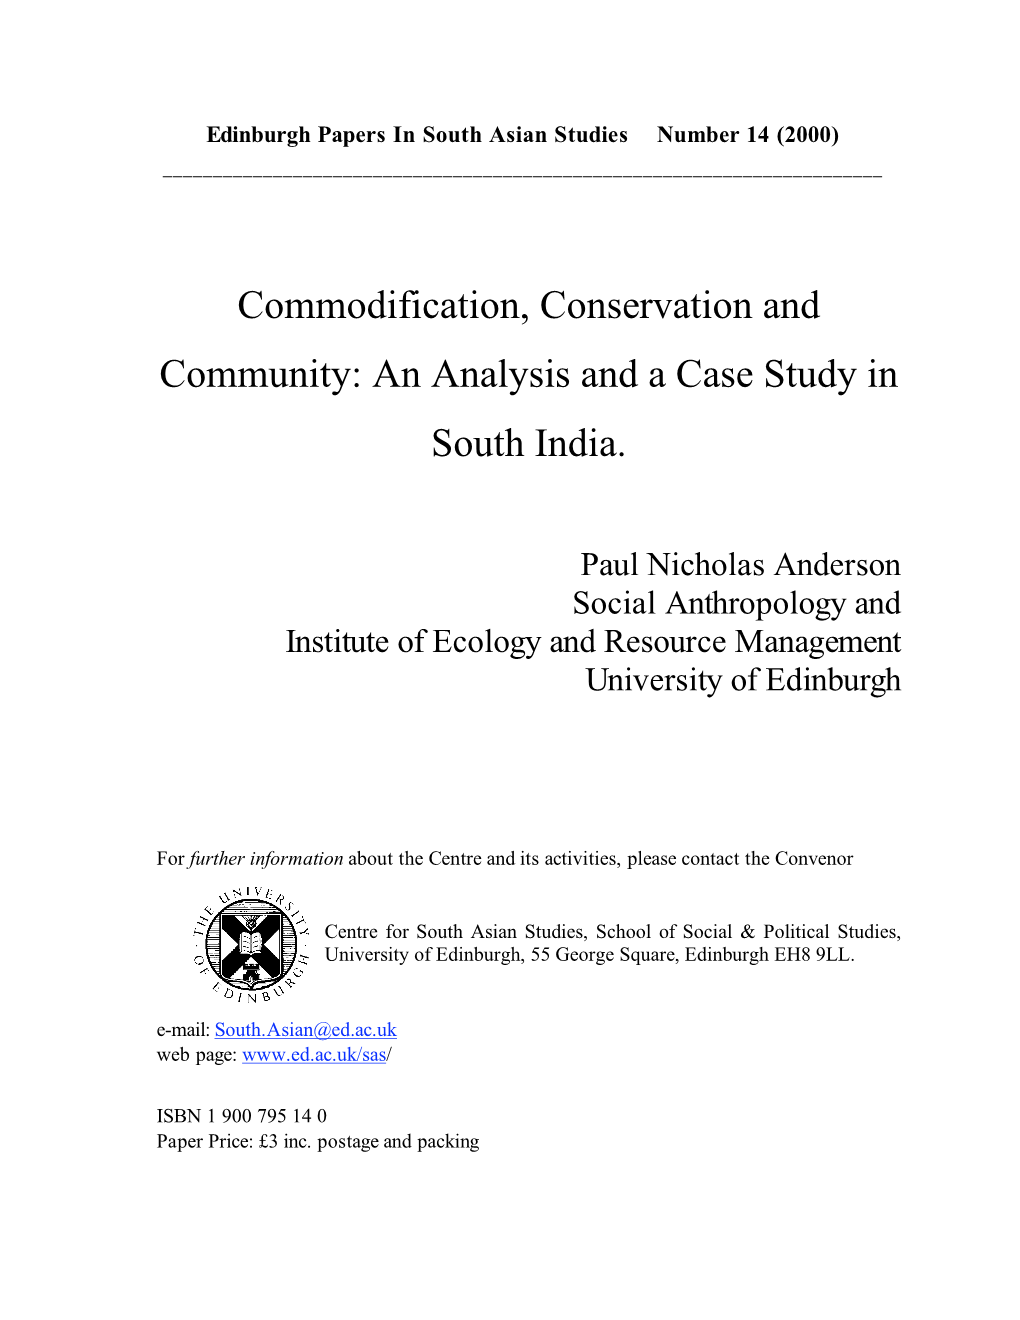 Commodification, Conservation and Community: an Analysis and a Case Study in South India